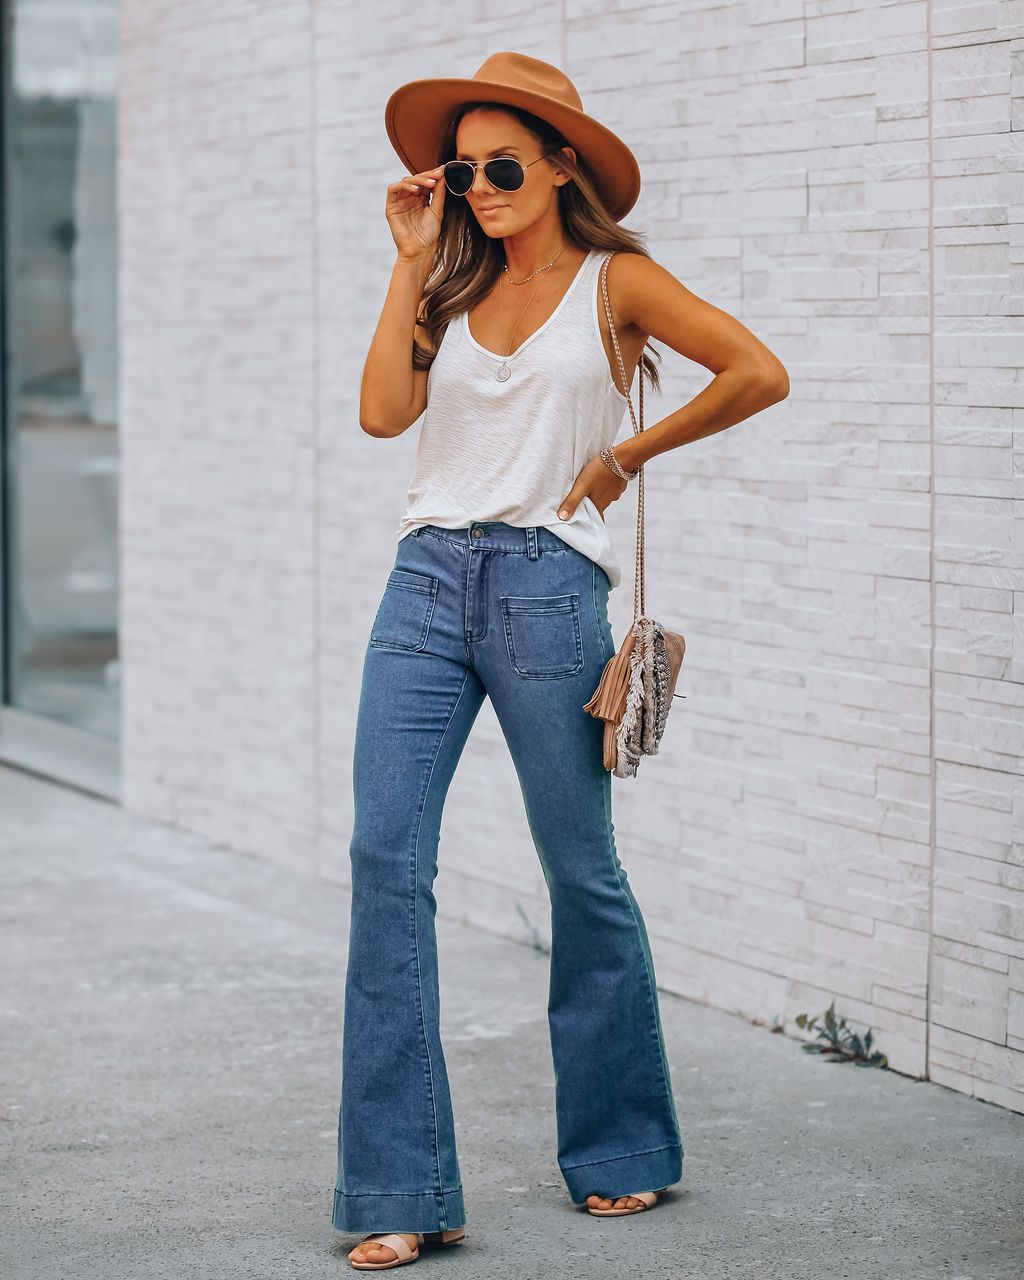 Wide Legged and Relaxed Jeans | 2021 Fashion & Beauty Trends 